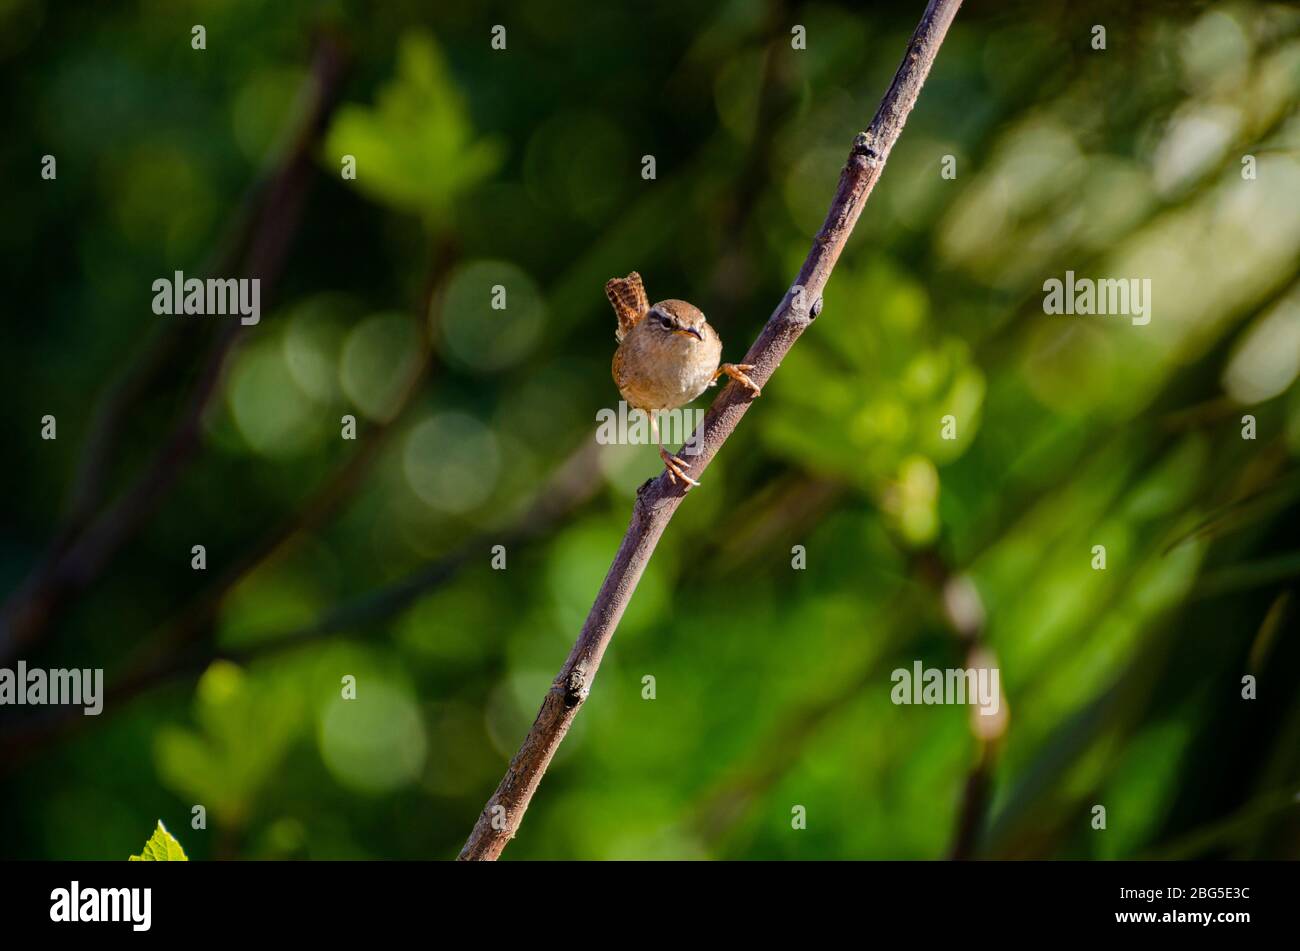 Wren on fig tree branch, blurred background Stock Photo